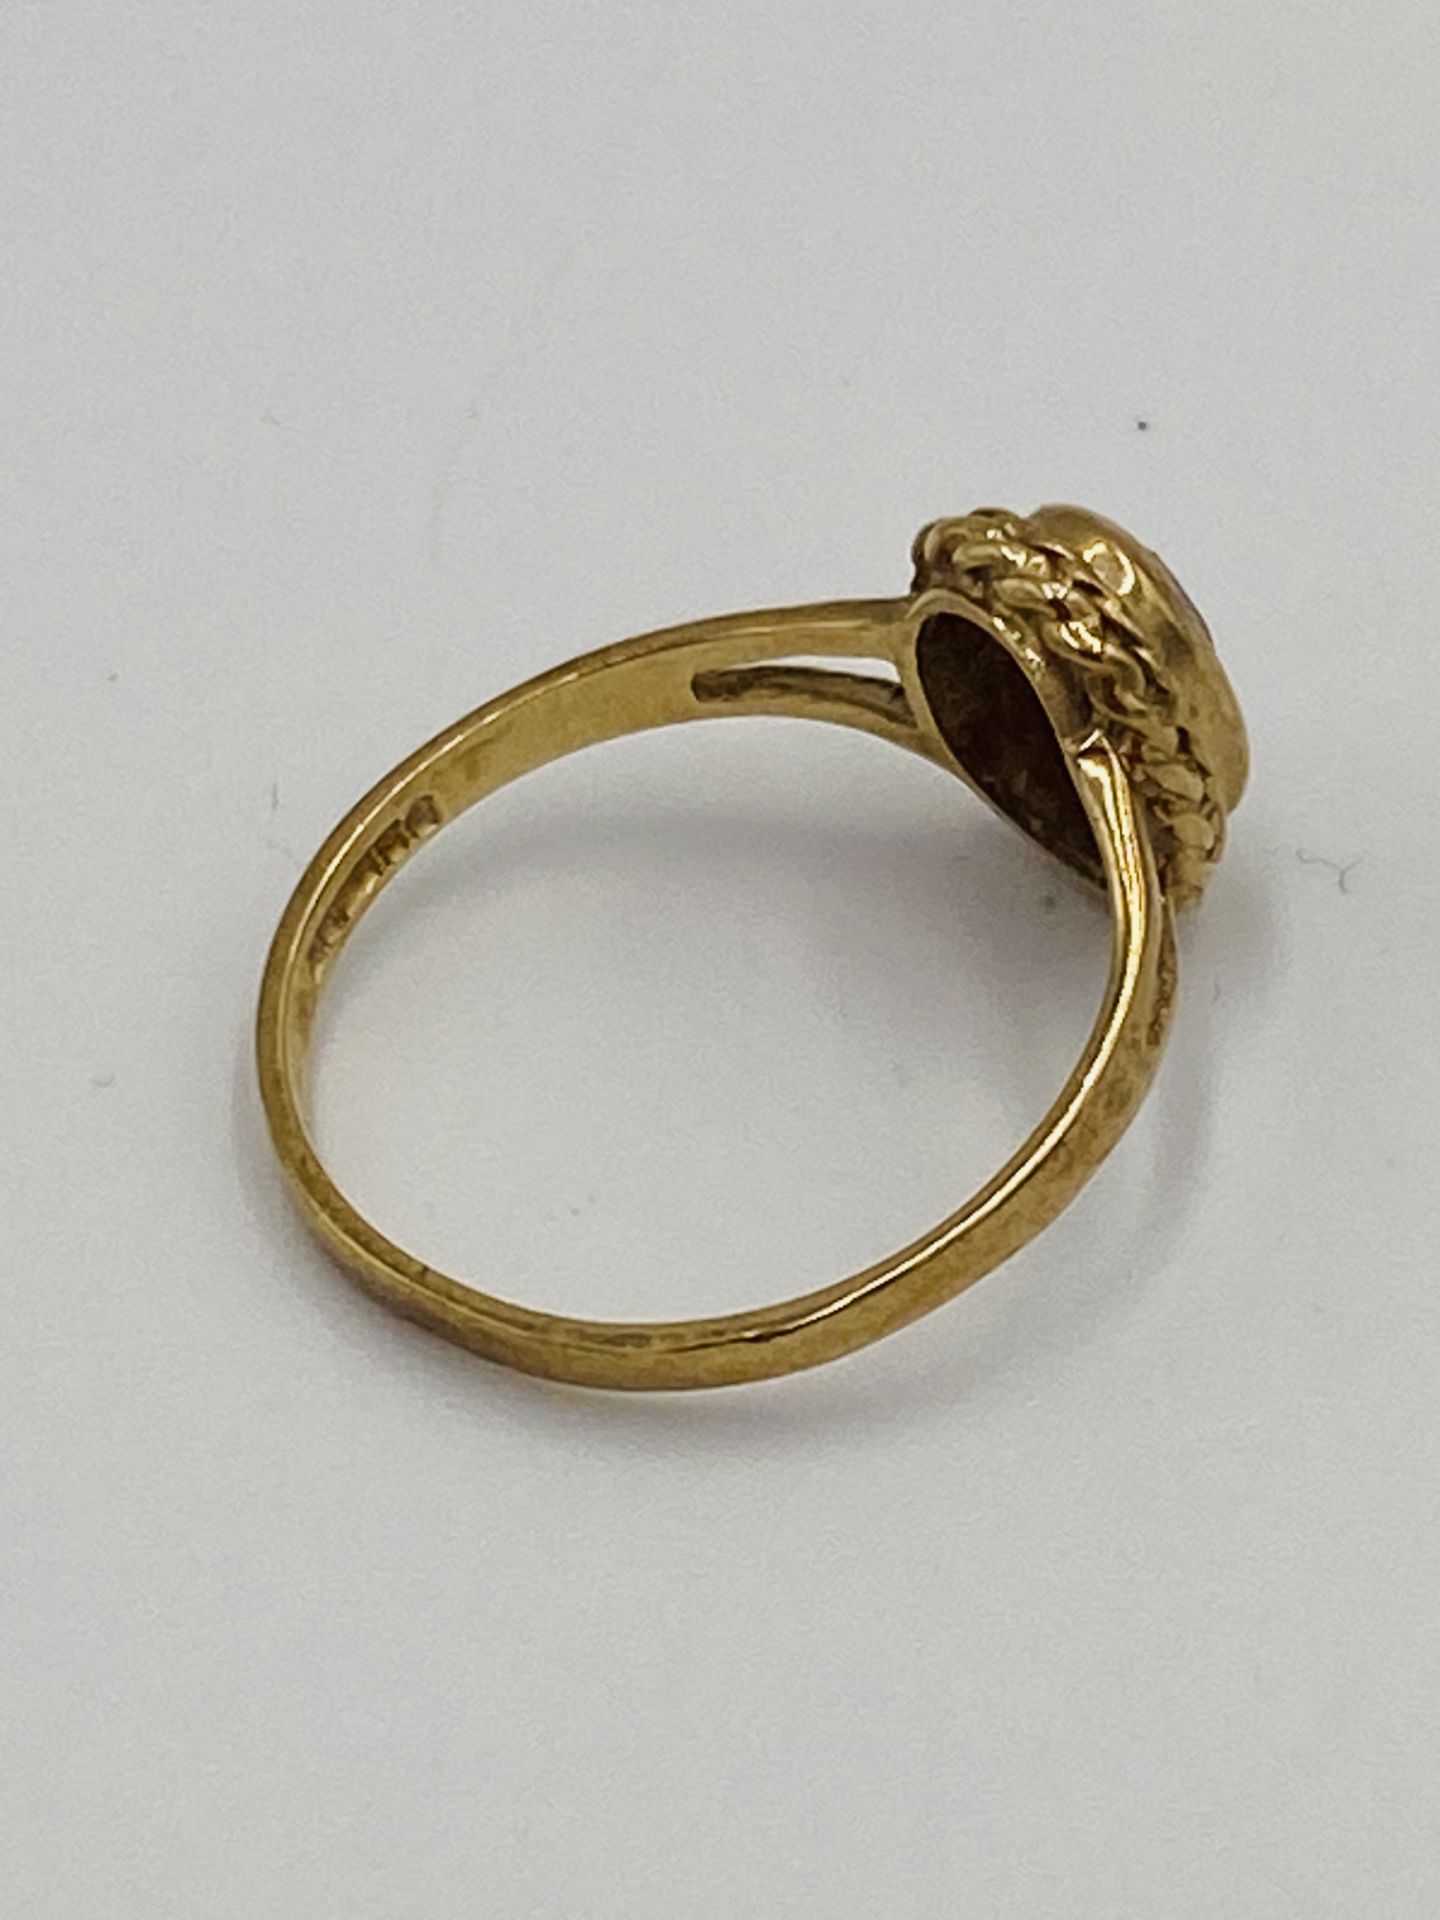 9ct gold ring set with a red stone - Image 5 of 5